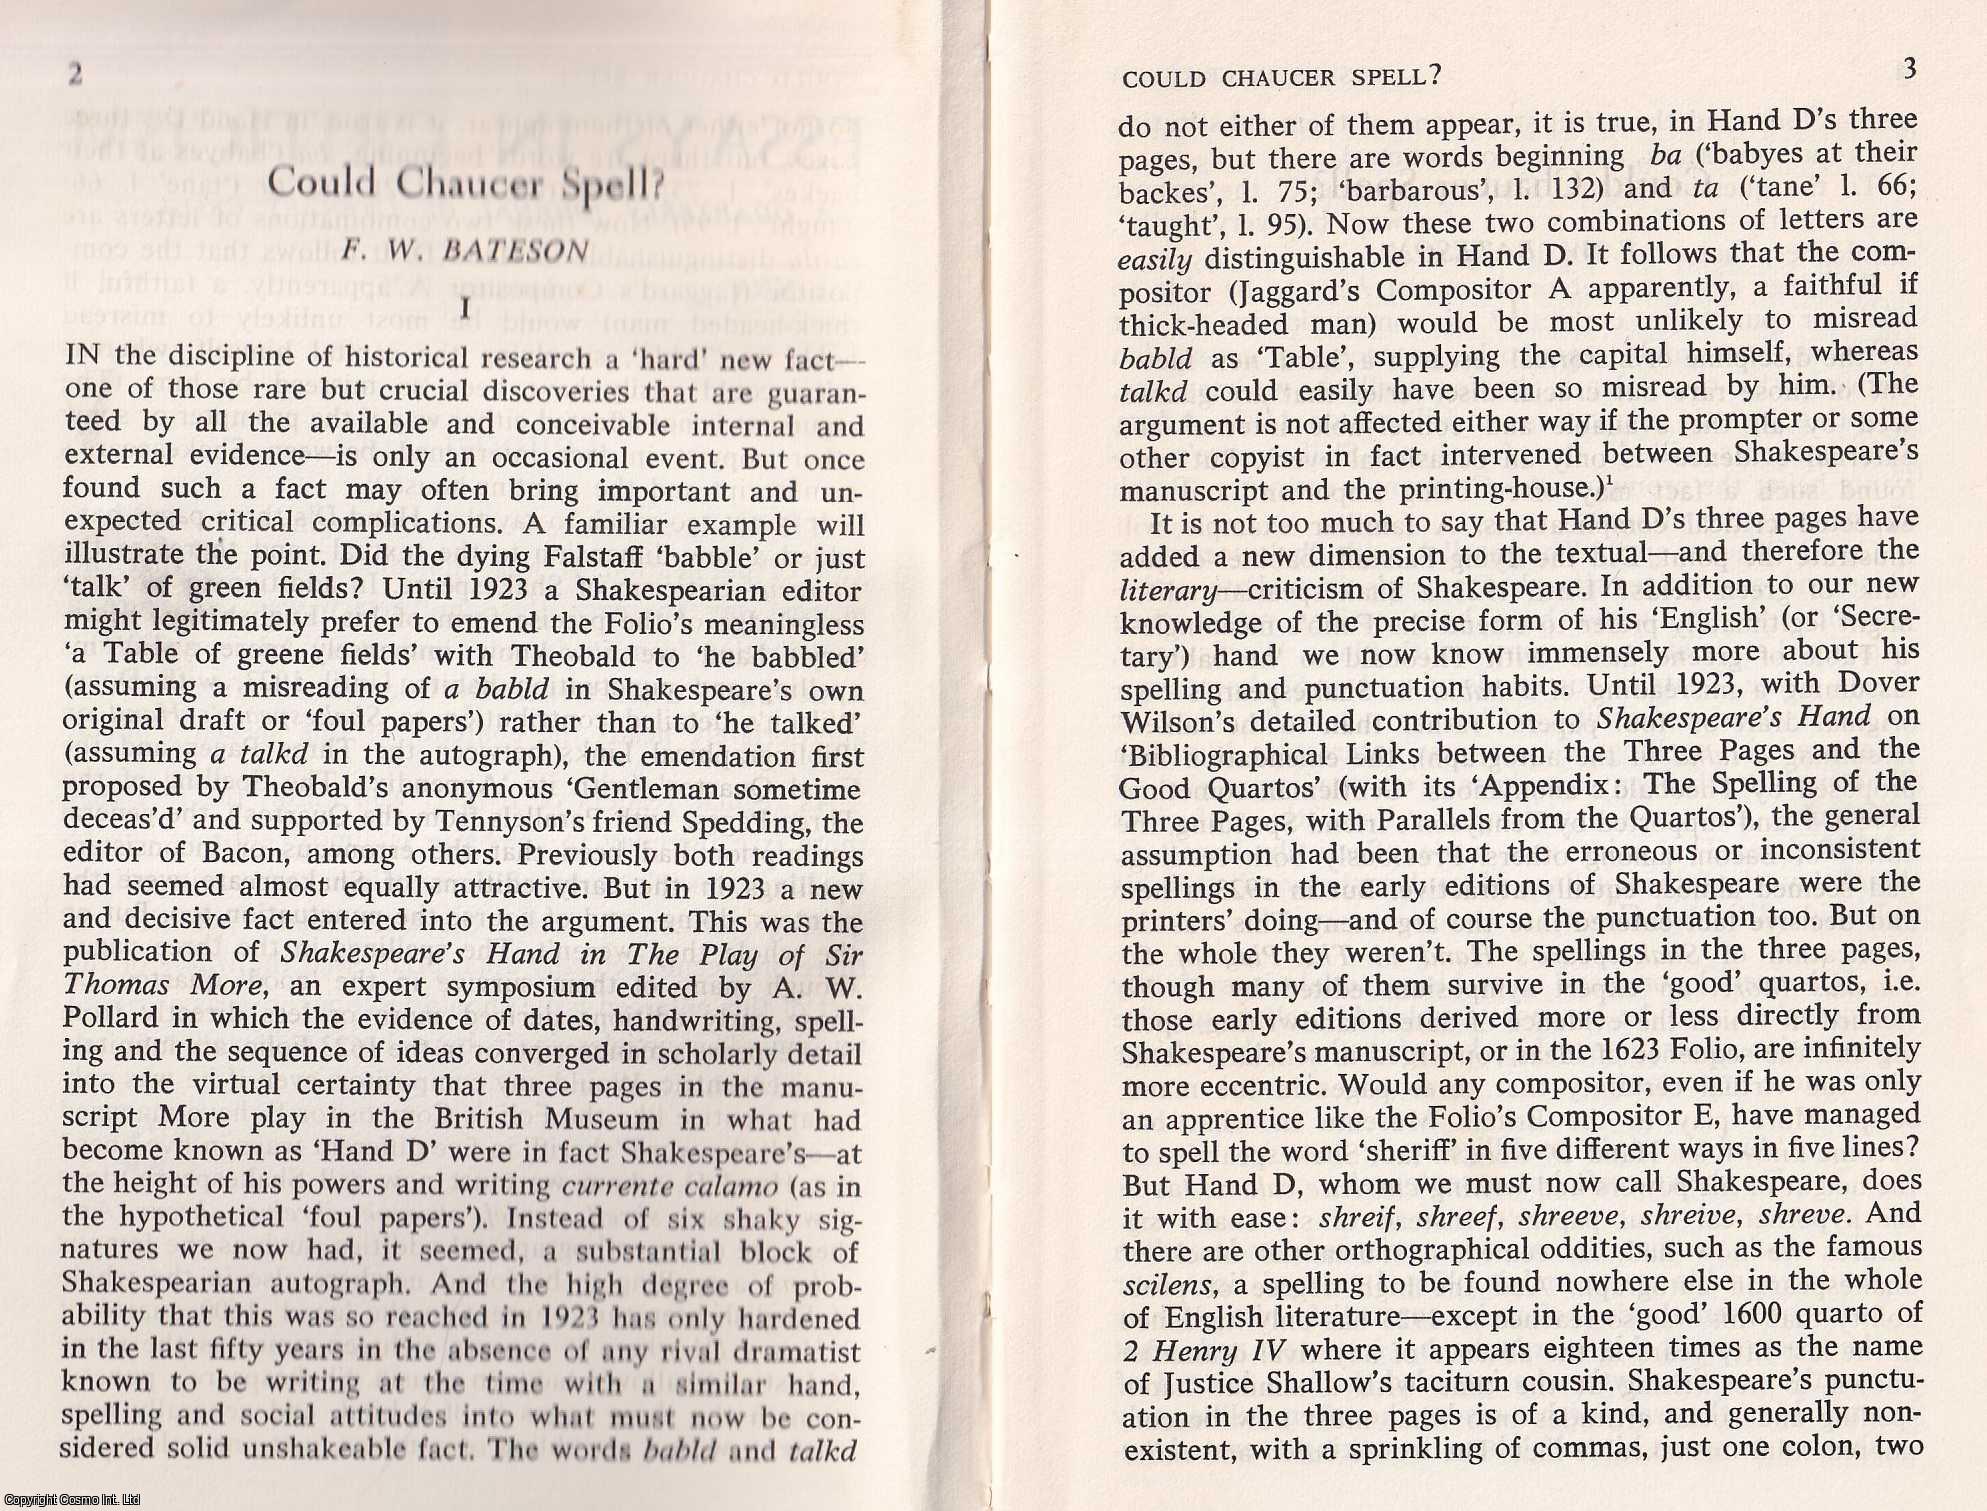 F. W. Bateson - Could Chaucer Spell? An original article from Essays in Criticism, 1975.